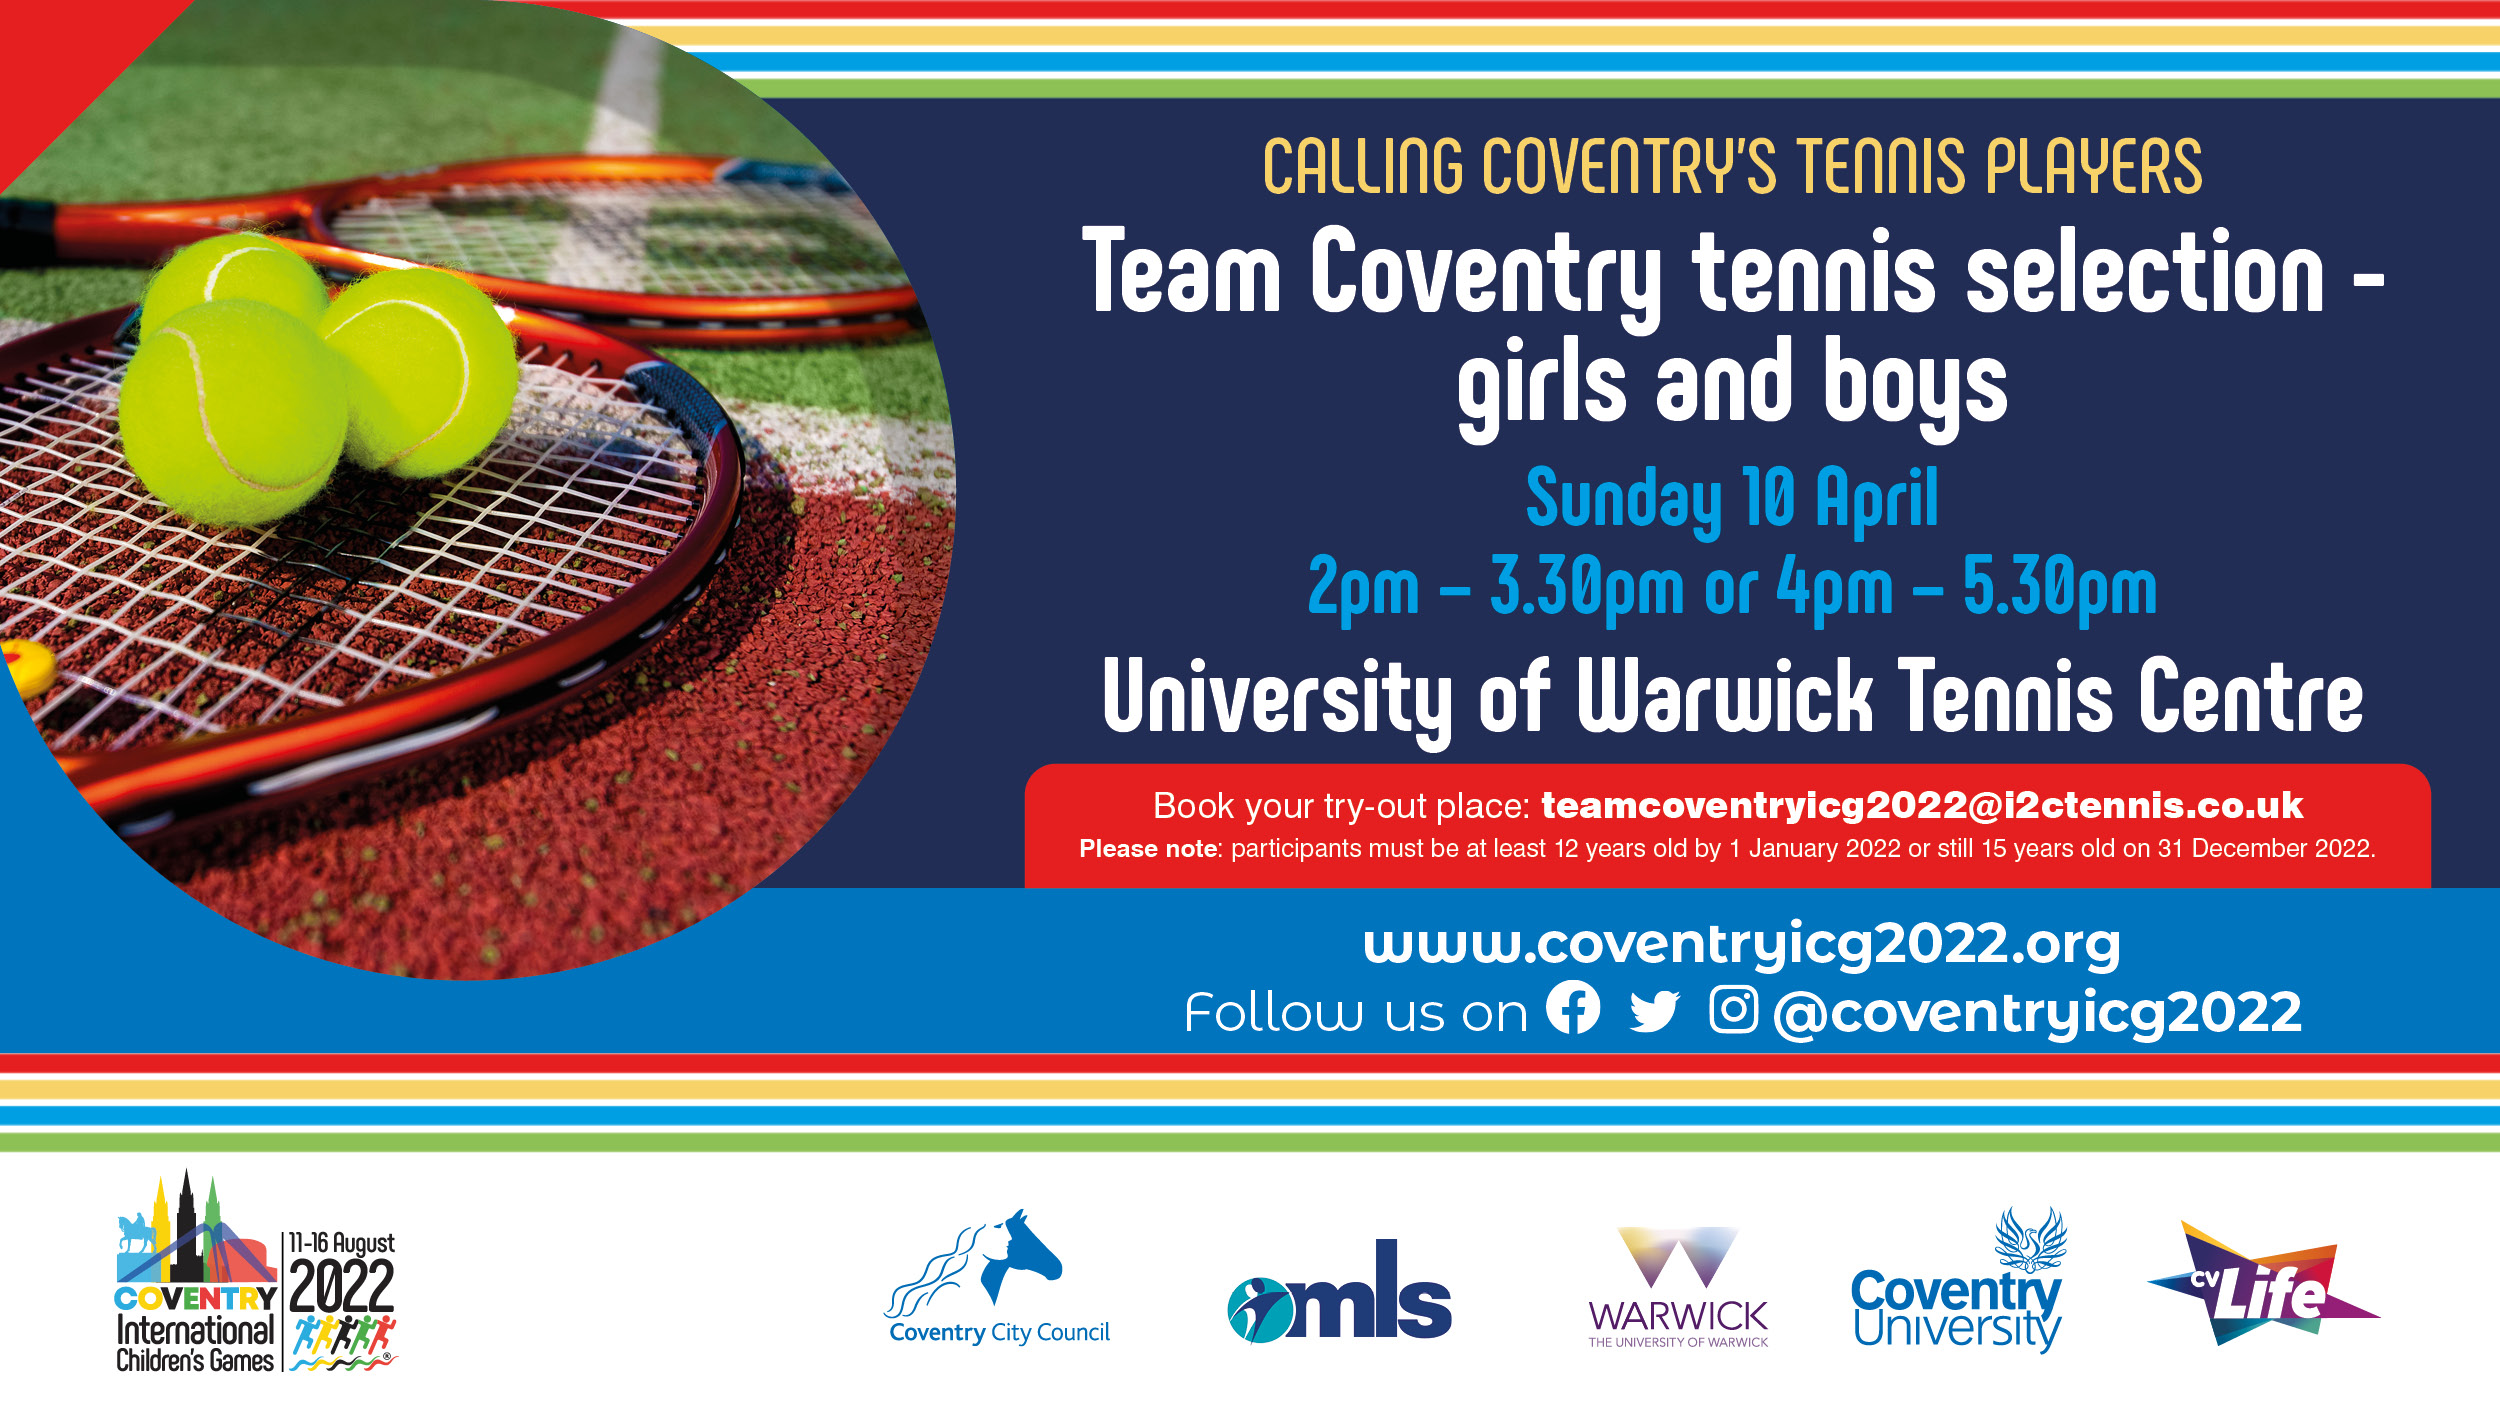 Team Coventry tennis selection details